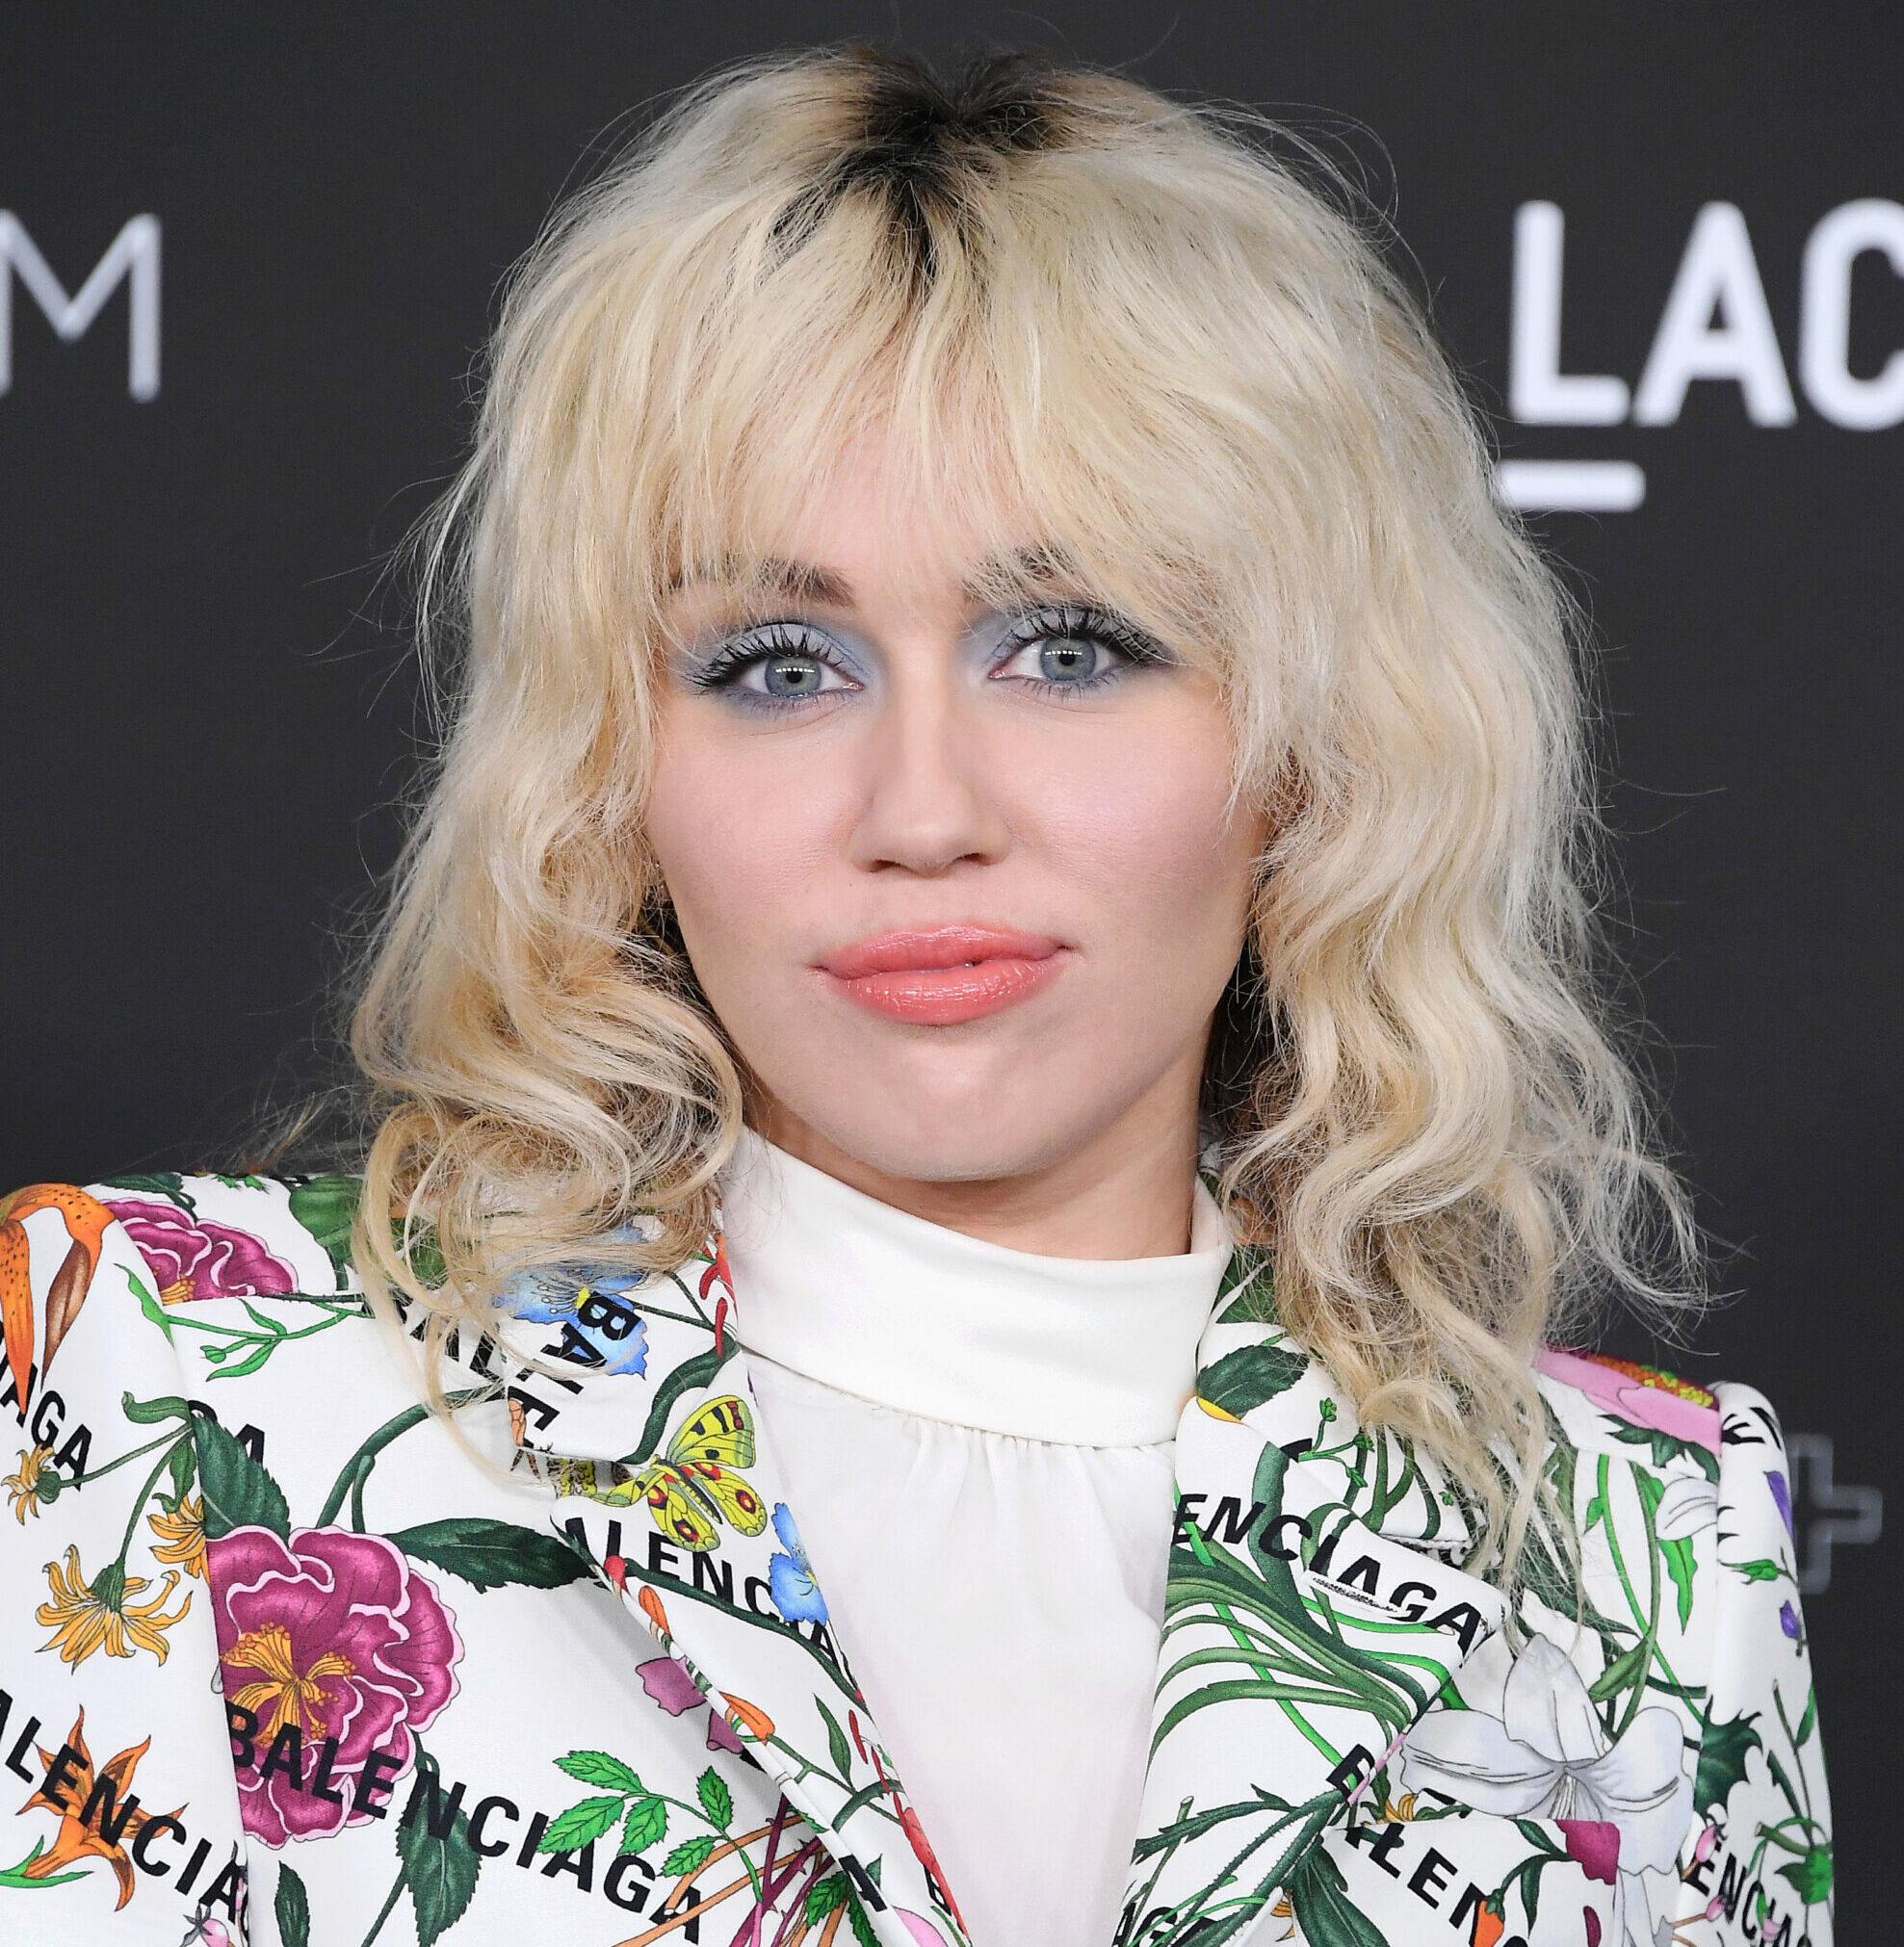 Miley Cyrus at the 10th Annual LACMA ART FILM GALA Presented By Gucci